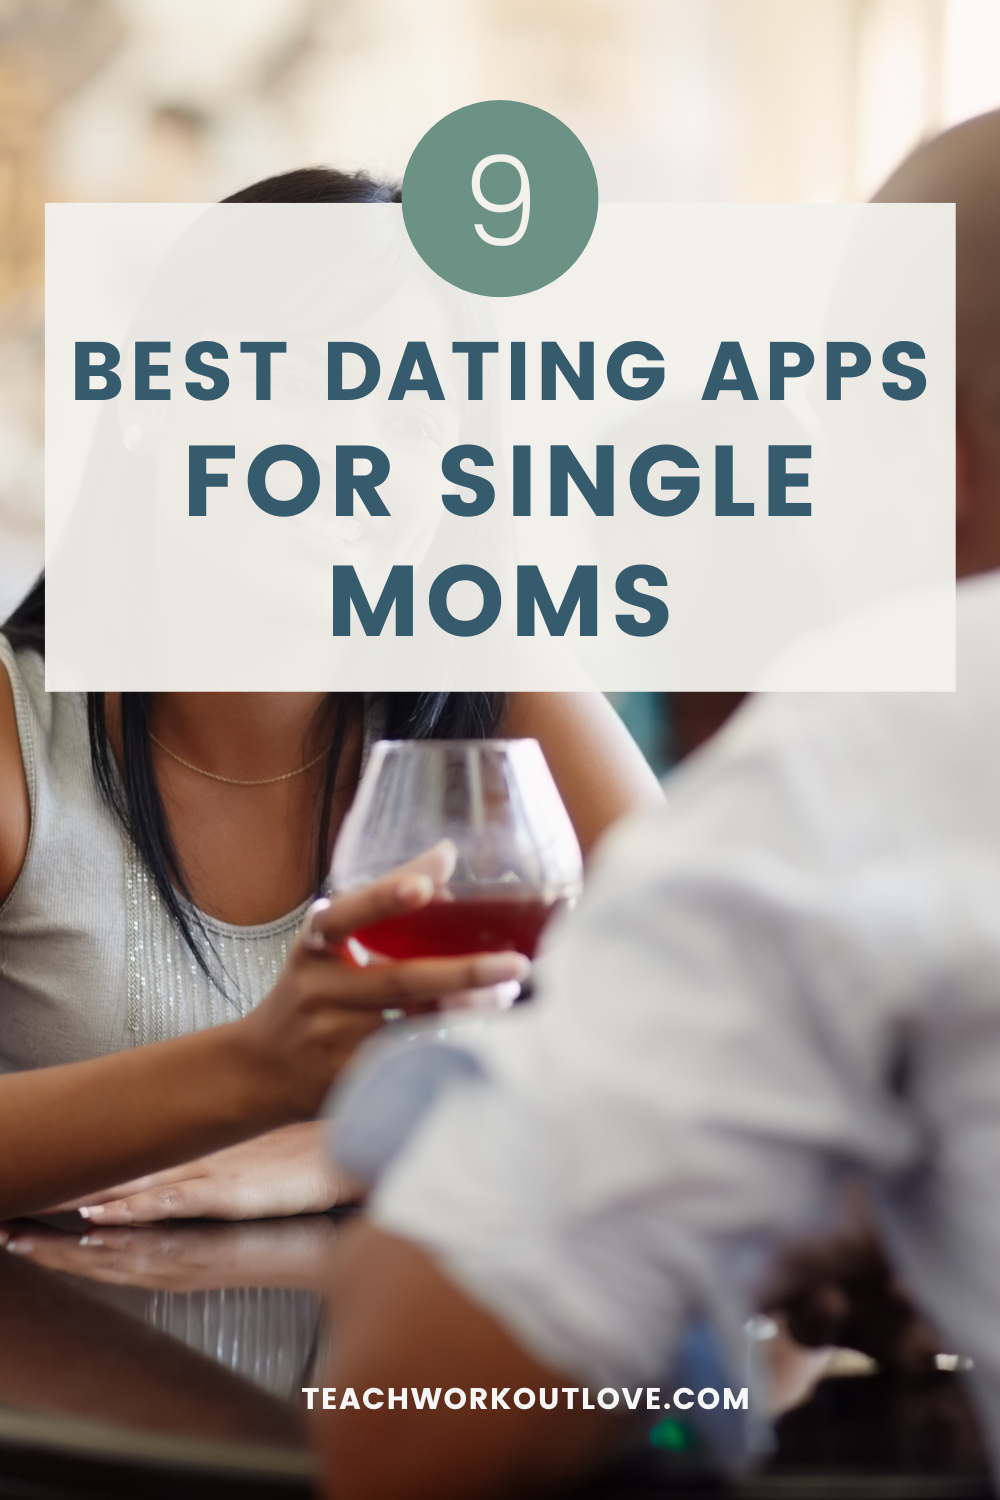 If you are a single mom and looking for a perfect partner, then check out the best dating app from the list to find one effortlessly.